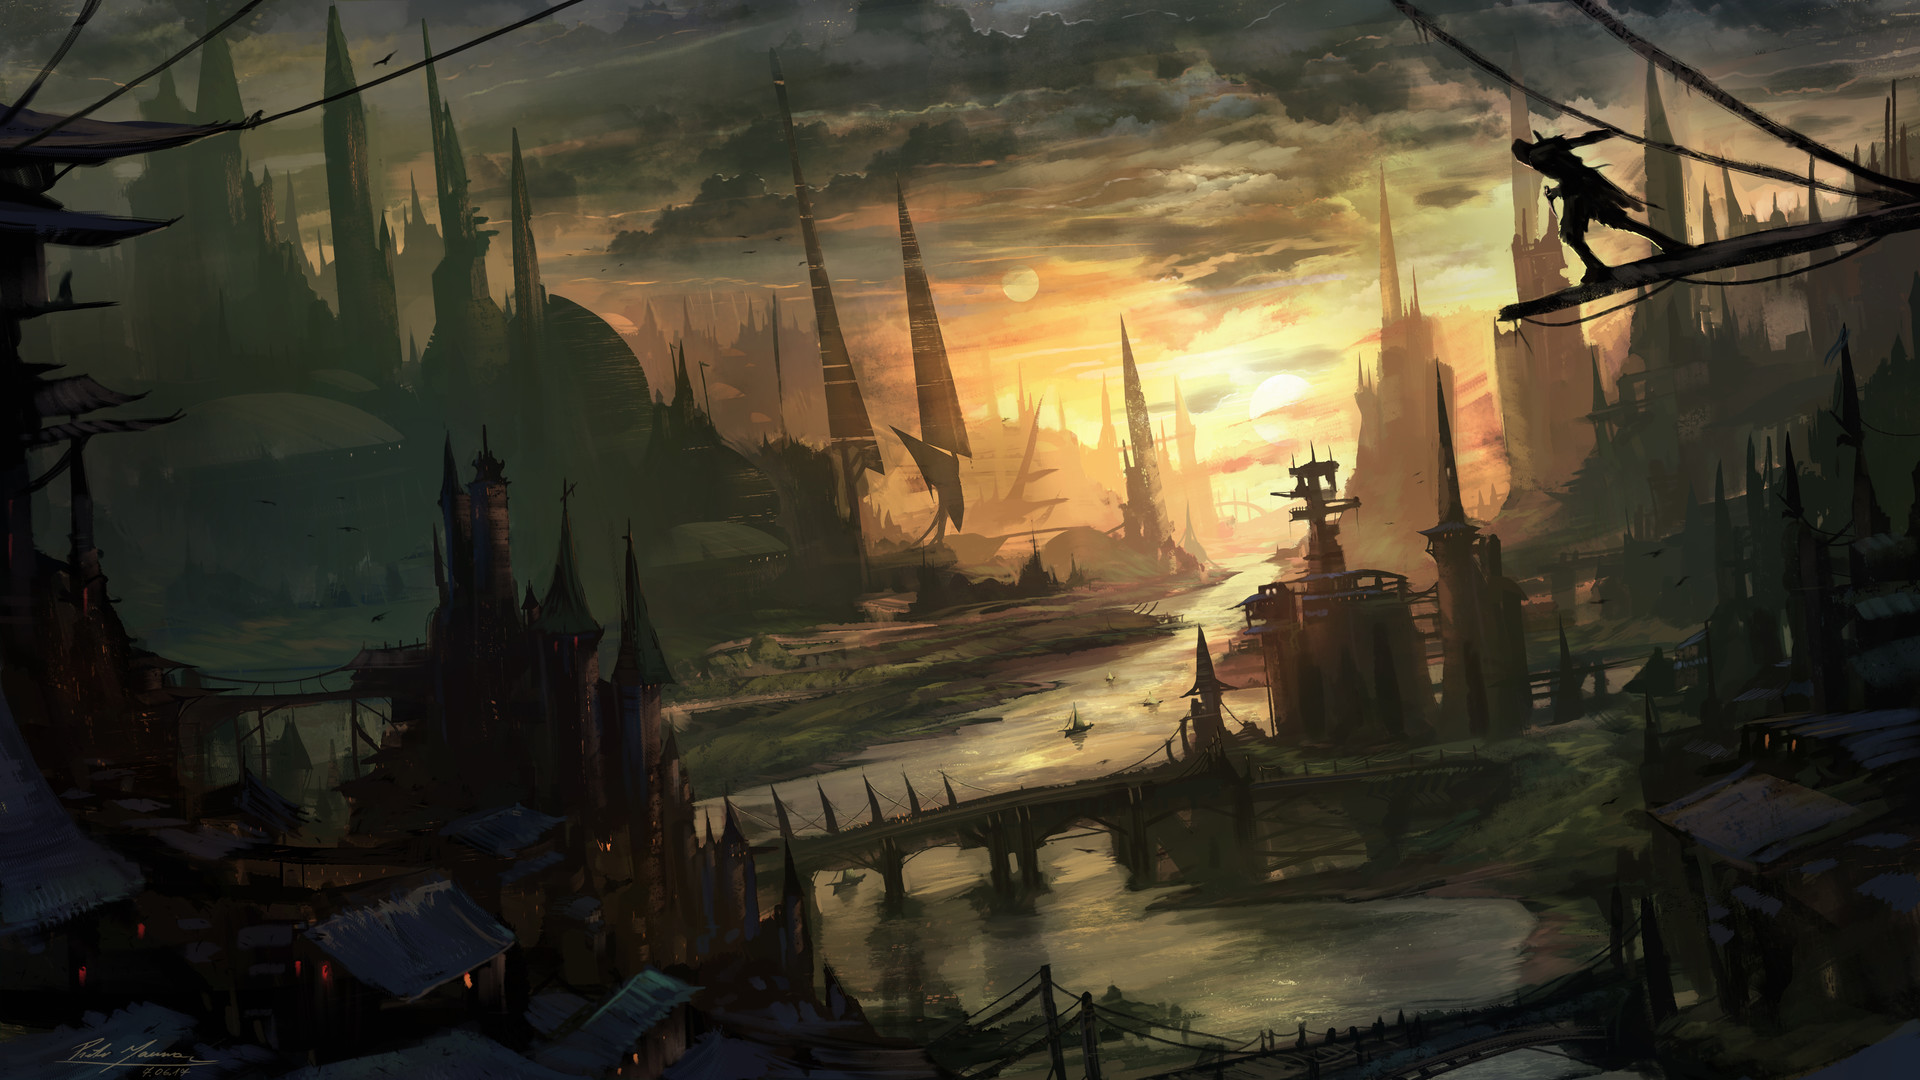 River to the sun, by Piotr Jamroz : r/ImaginaryCityscapes